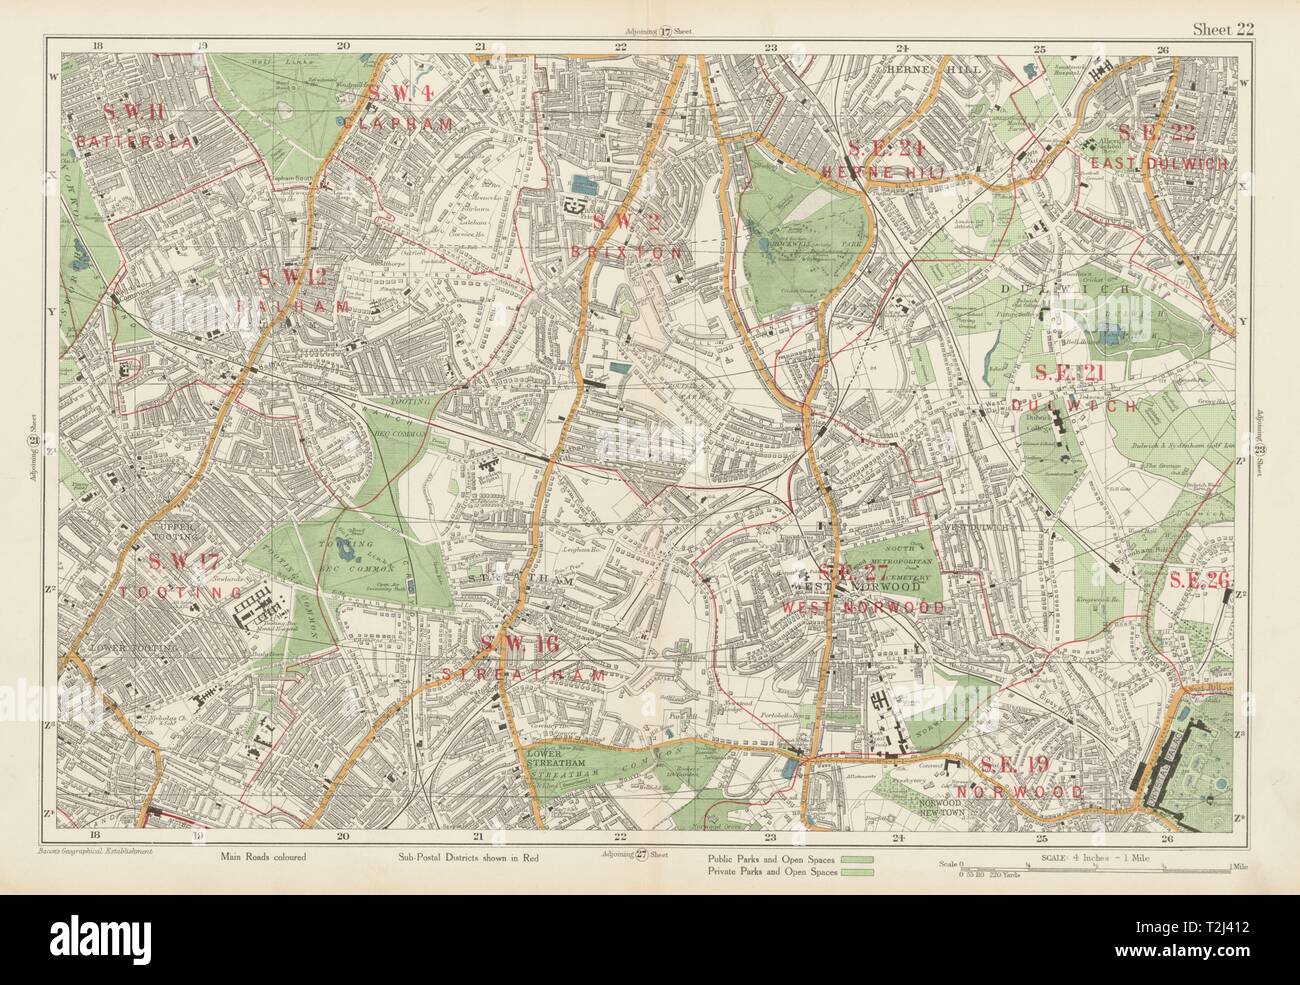 STREATHAM W Norwood Brixton Balham Tooting Dulwich Herne Hill. BACON 1934 mappa Foto Stock